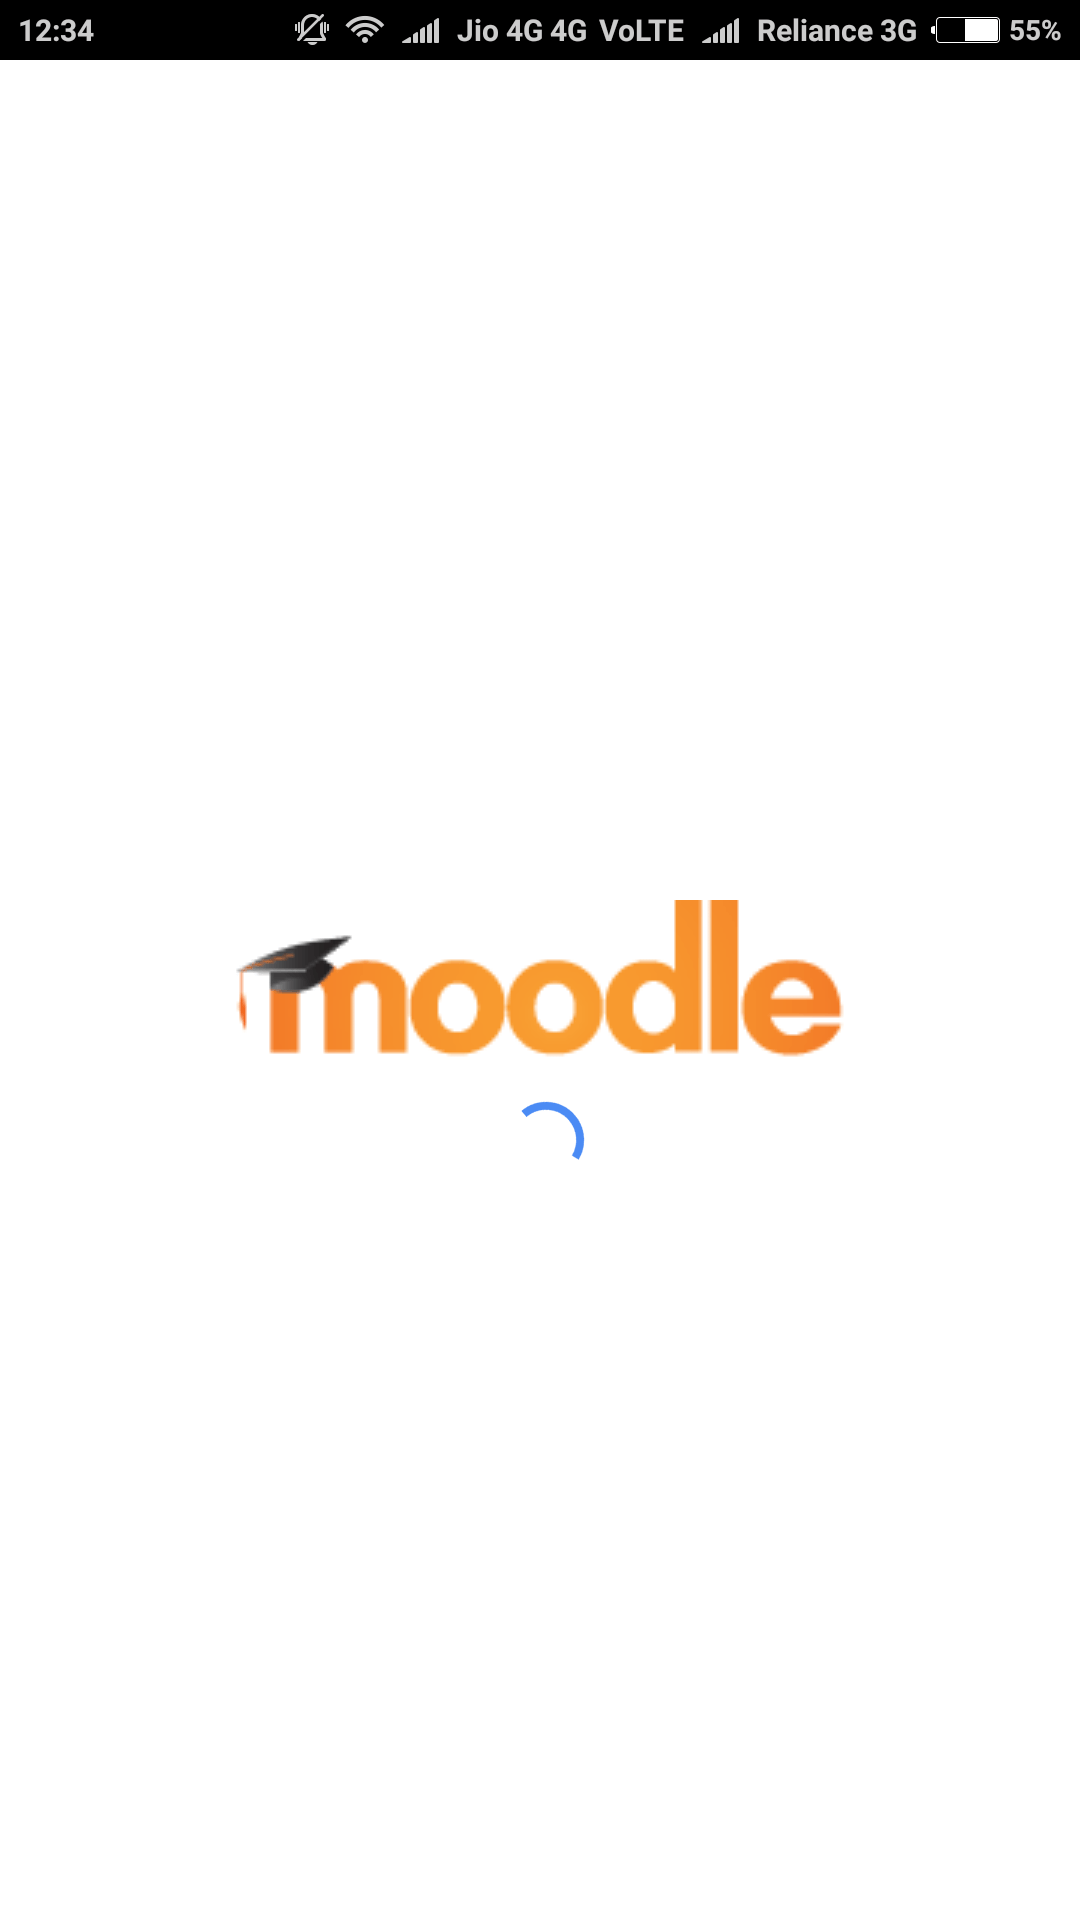 General Mobile App Logo - Moodle in English: How to replace moodle logo with site logo in ...